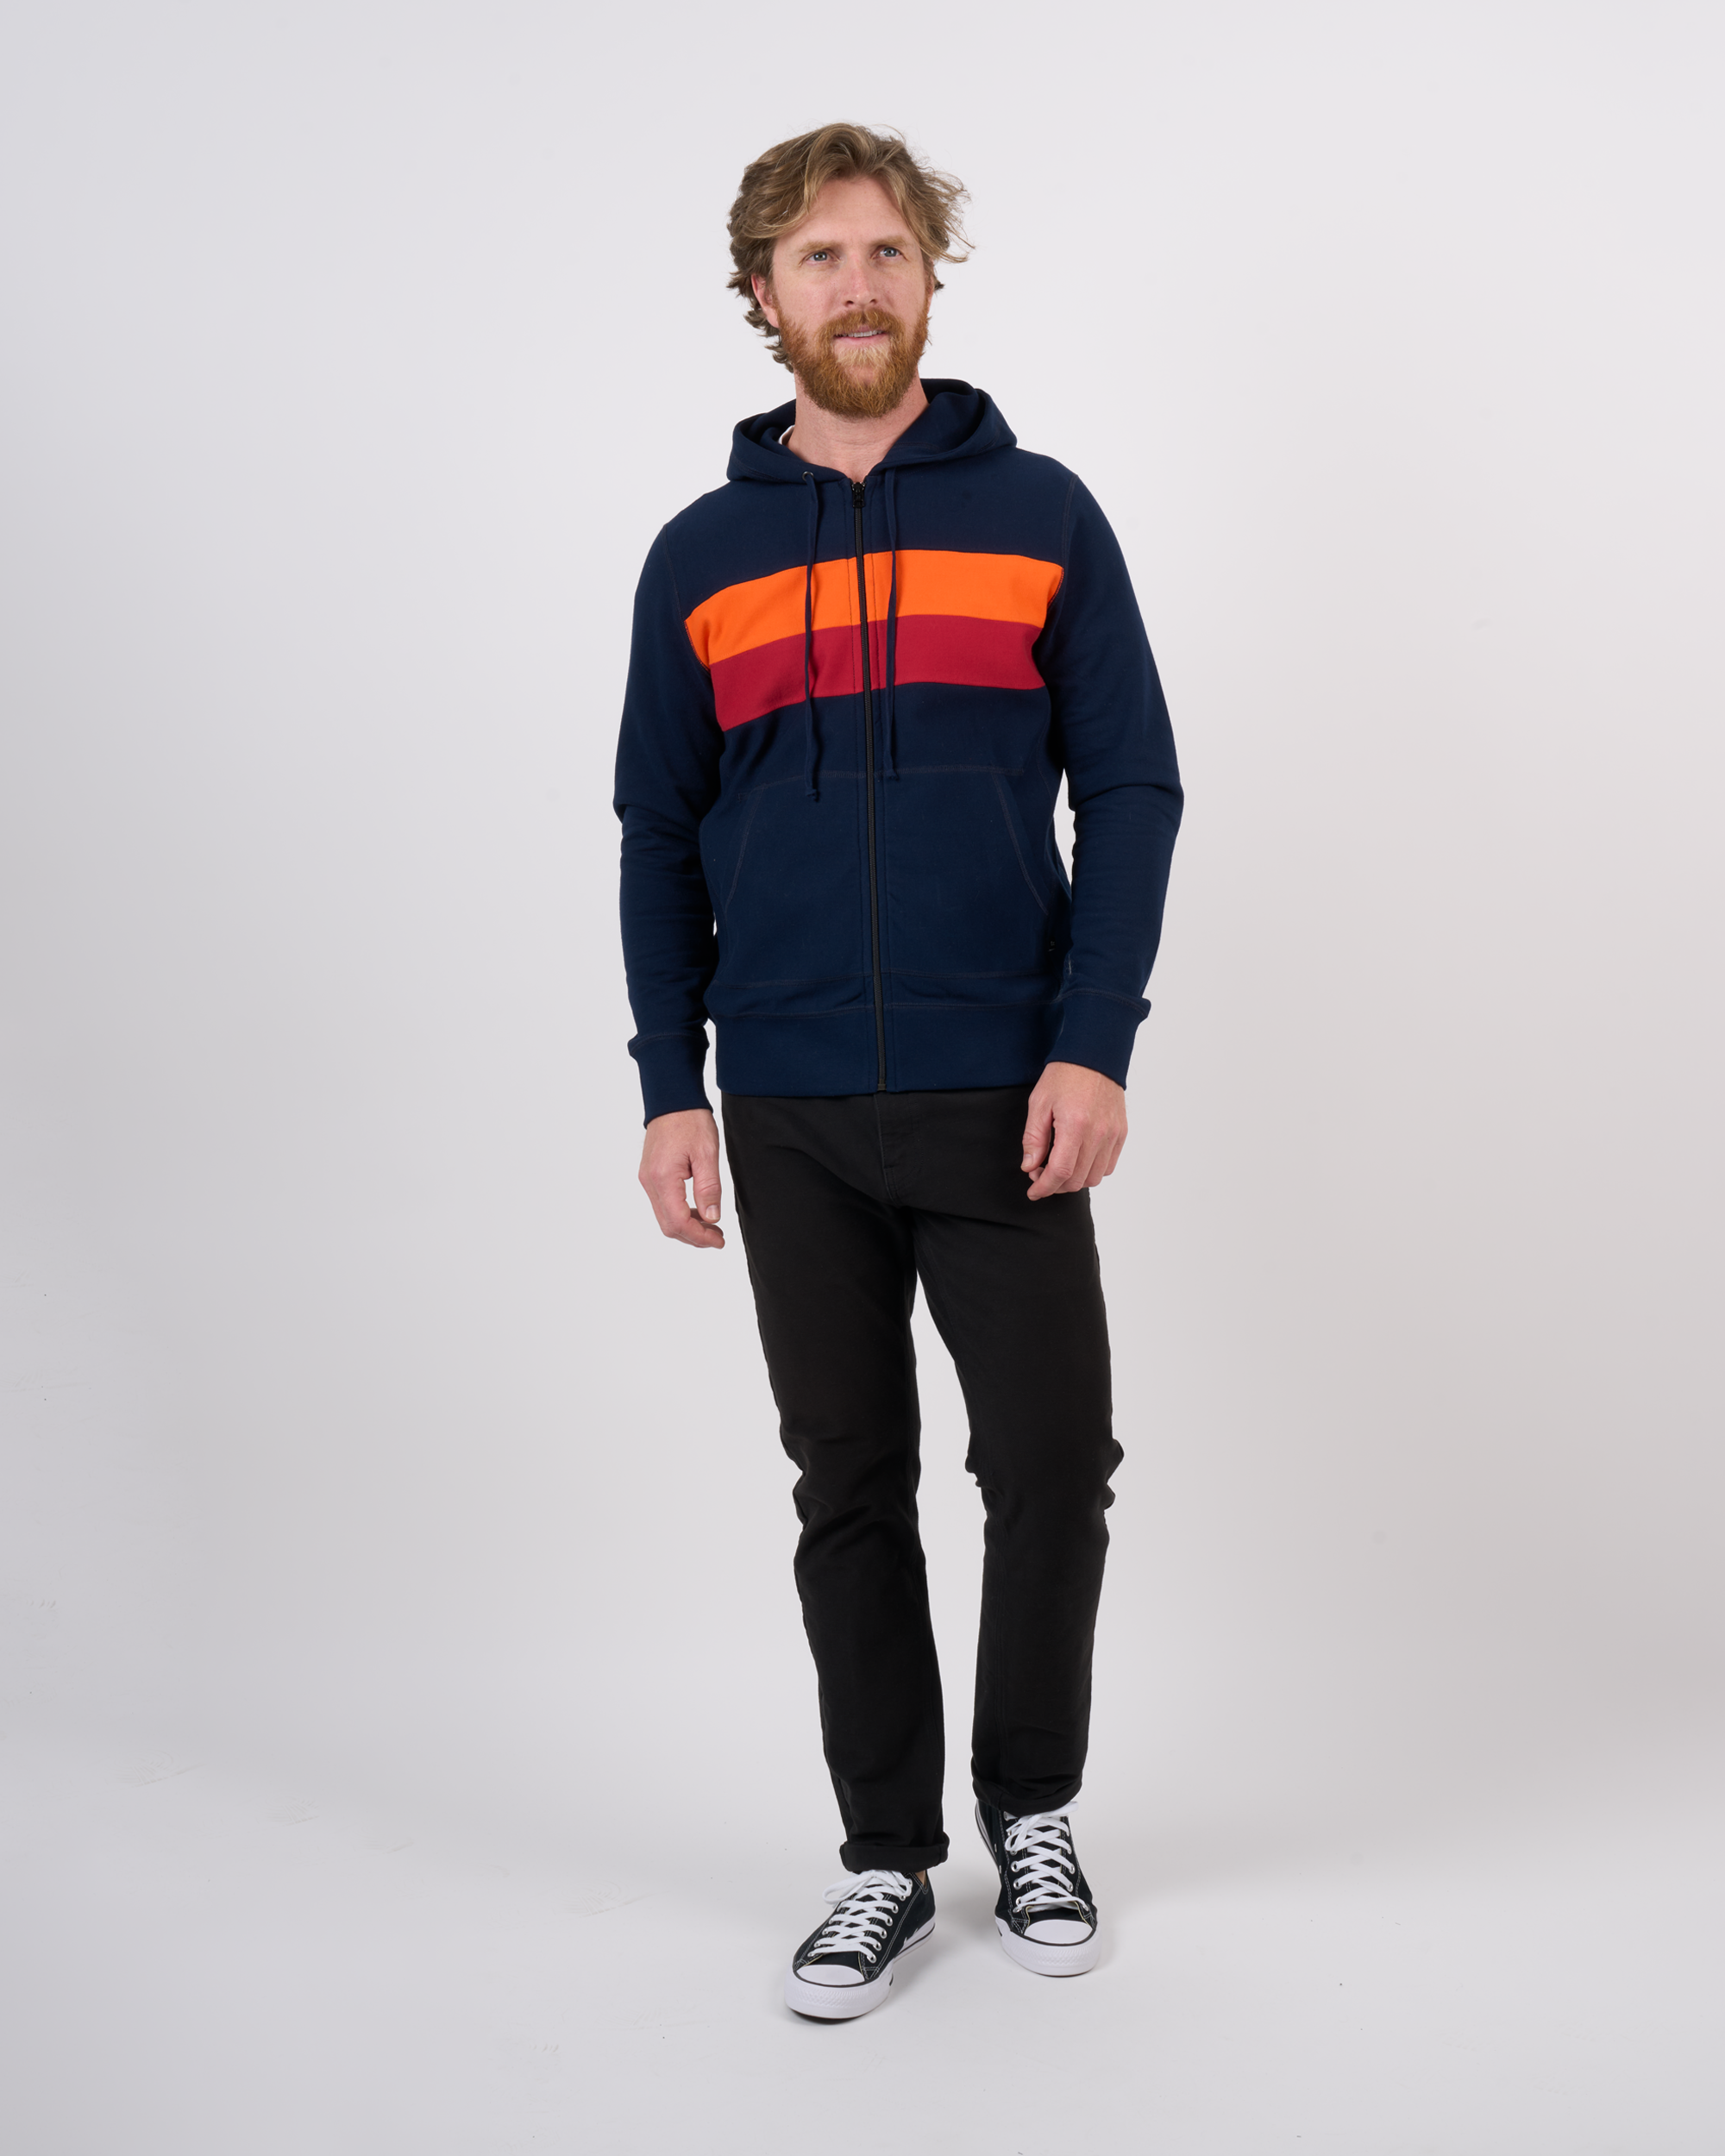 Foreign Rider Co Organic Cotton Navy Two Stripe Zip Hooded Sweater Model size 3(L)